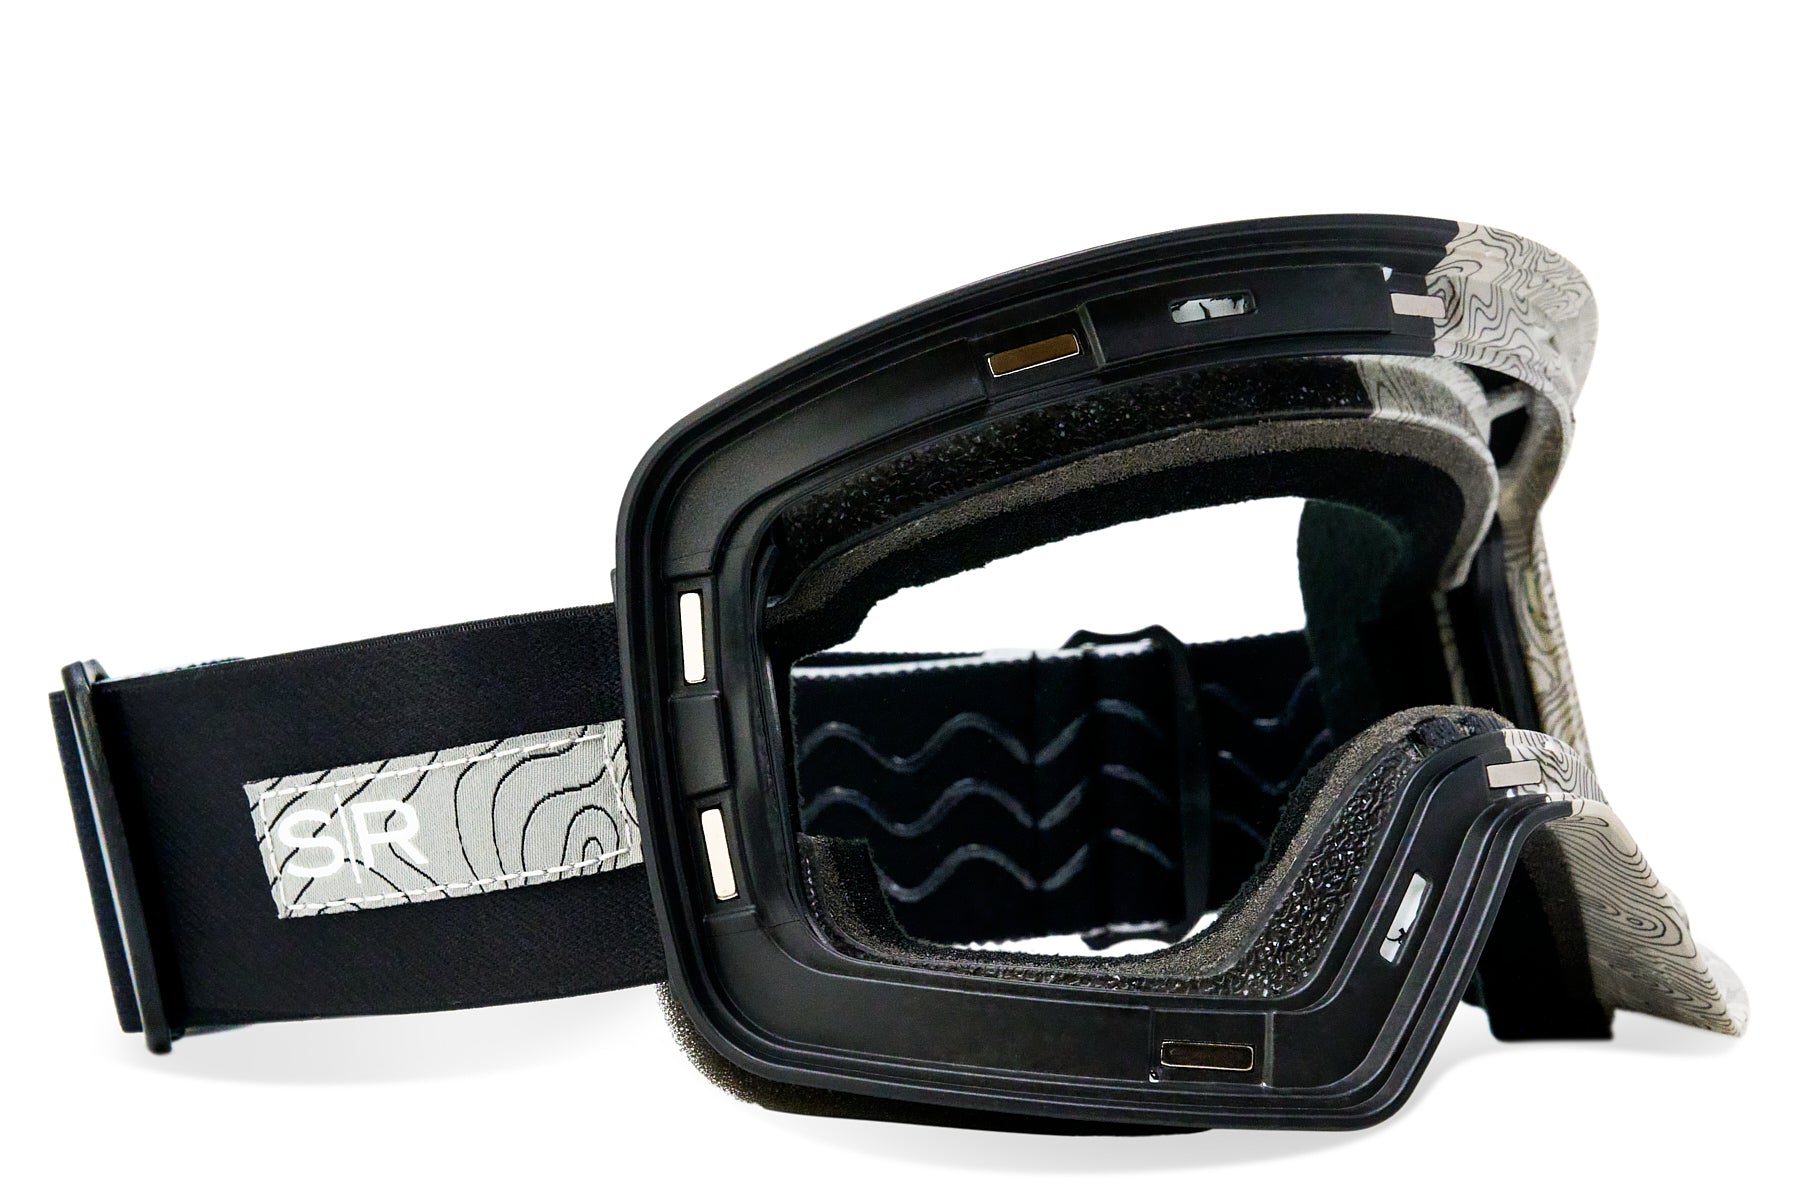 Frontier Snow Goggle - Stealth Terrain Magnetic Frame + Strap (Lens Not Included)